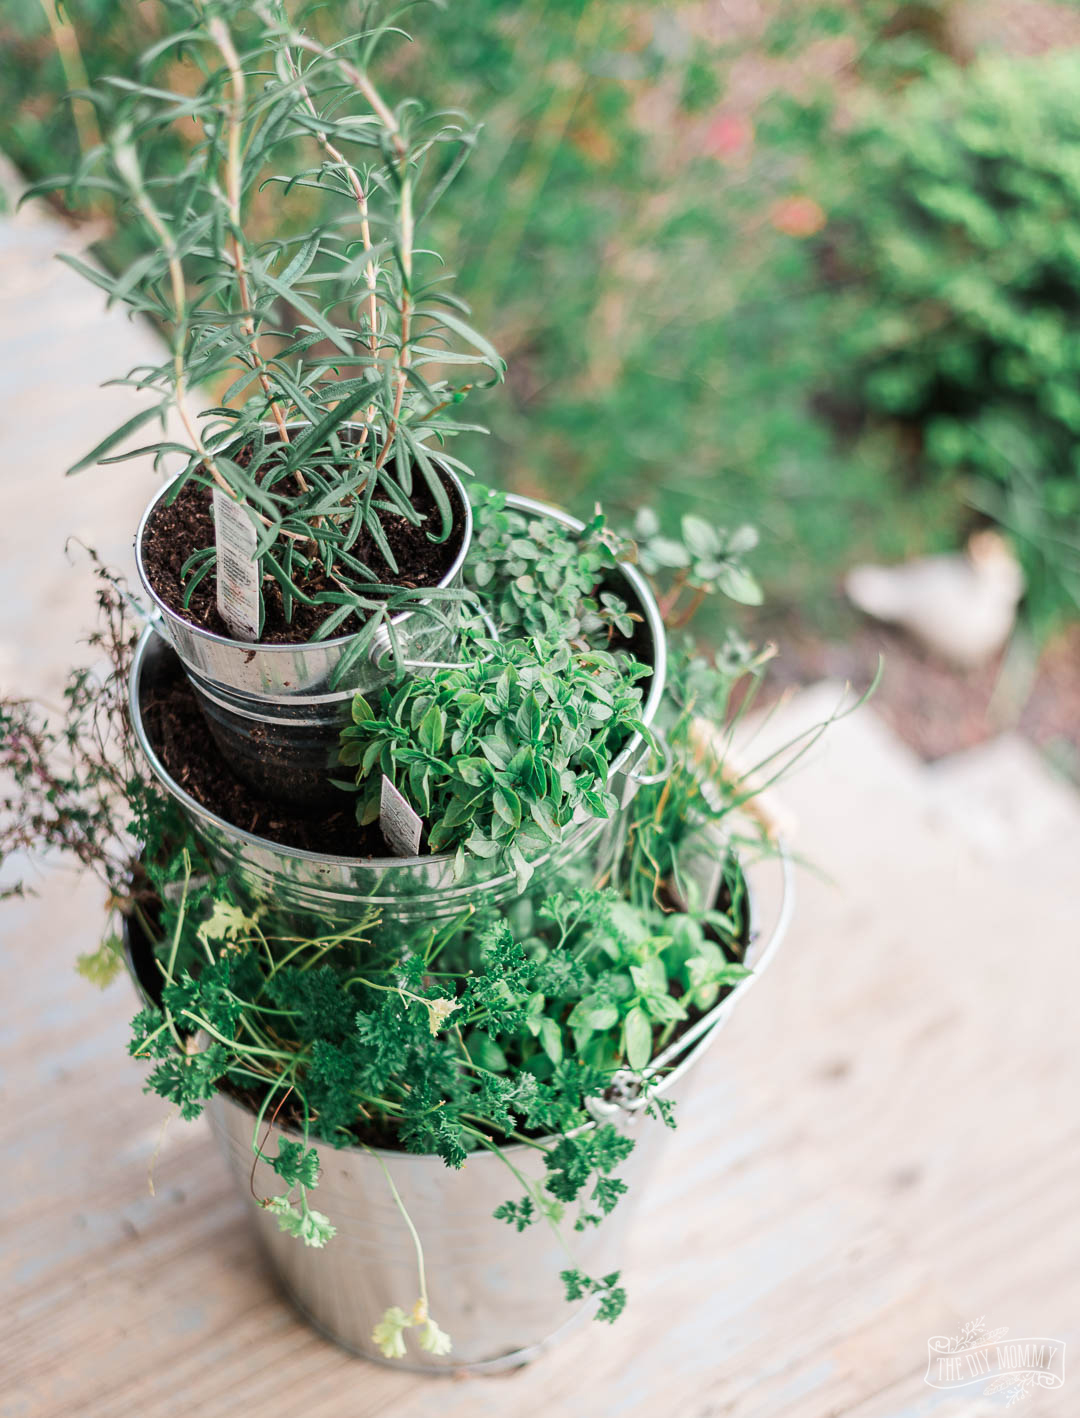 Make a Tiered Herb Planter with Dollar Store Buckets